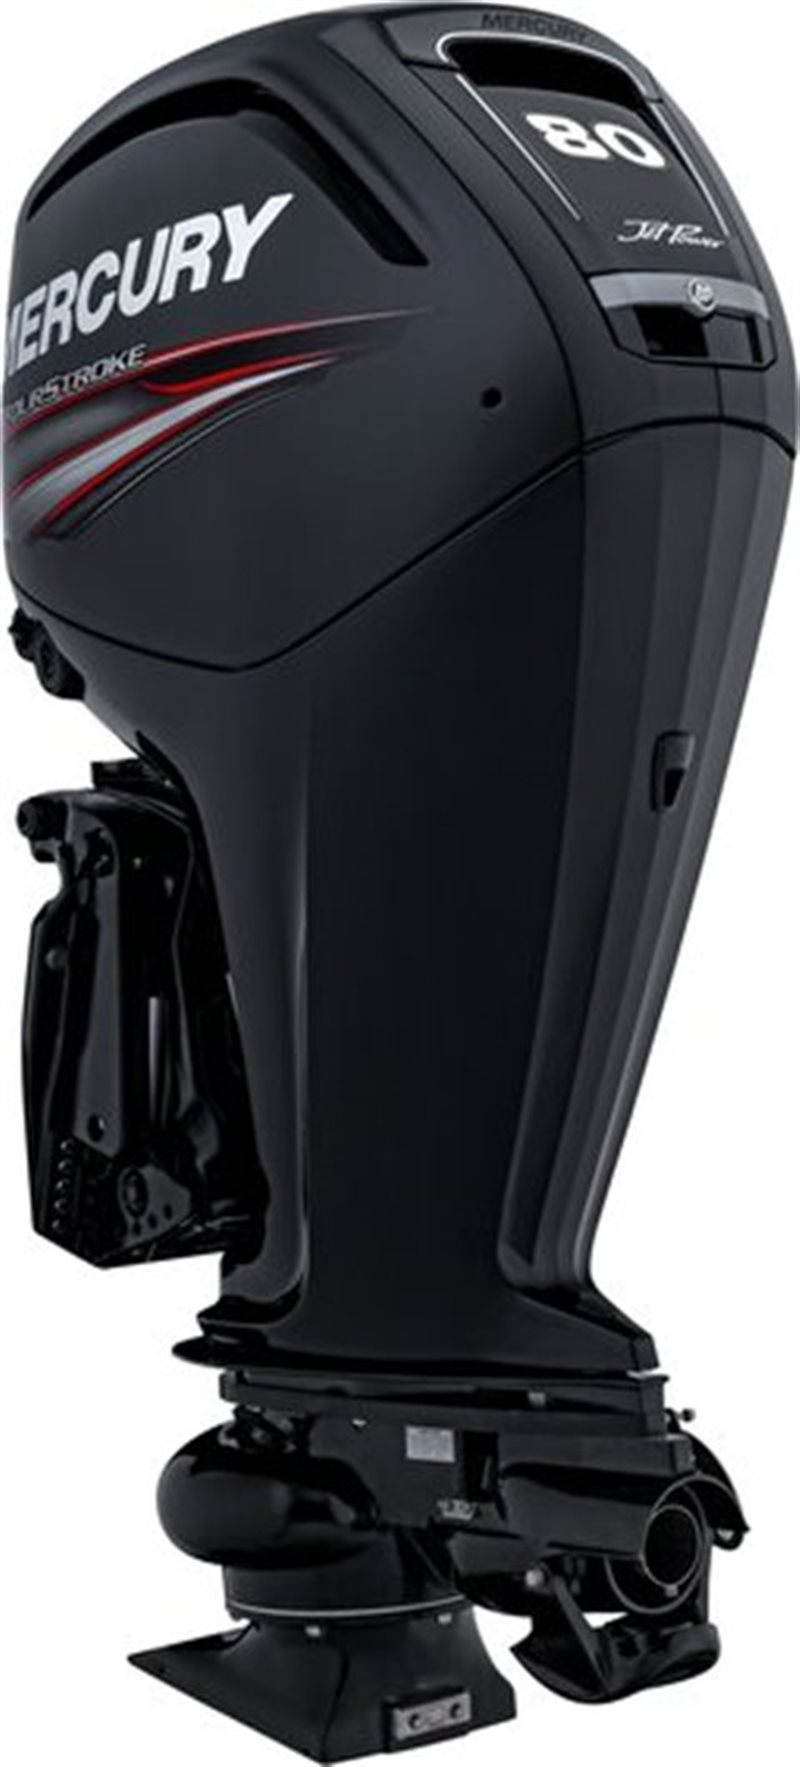 2020 Mercury Outboard FourStroke Jet Outboards 25-80 hp 80 hp Jet FourStroke at Fort Fremont Marine